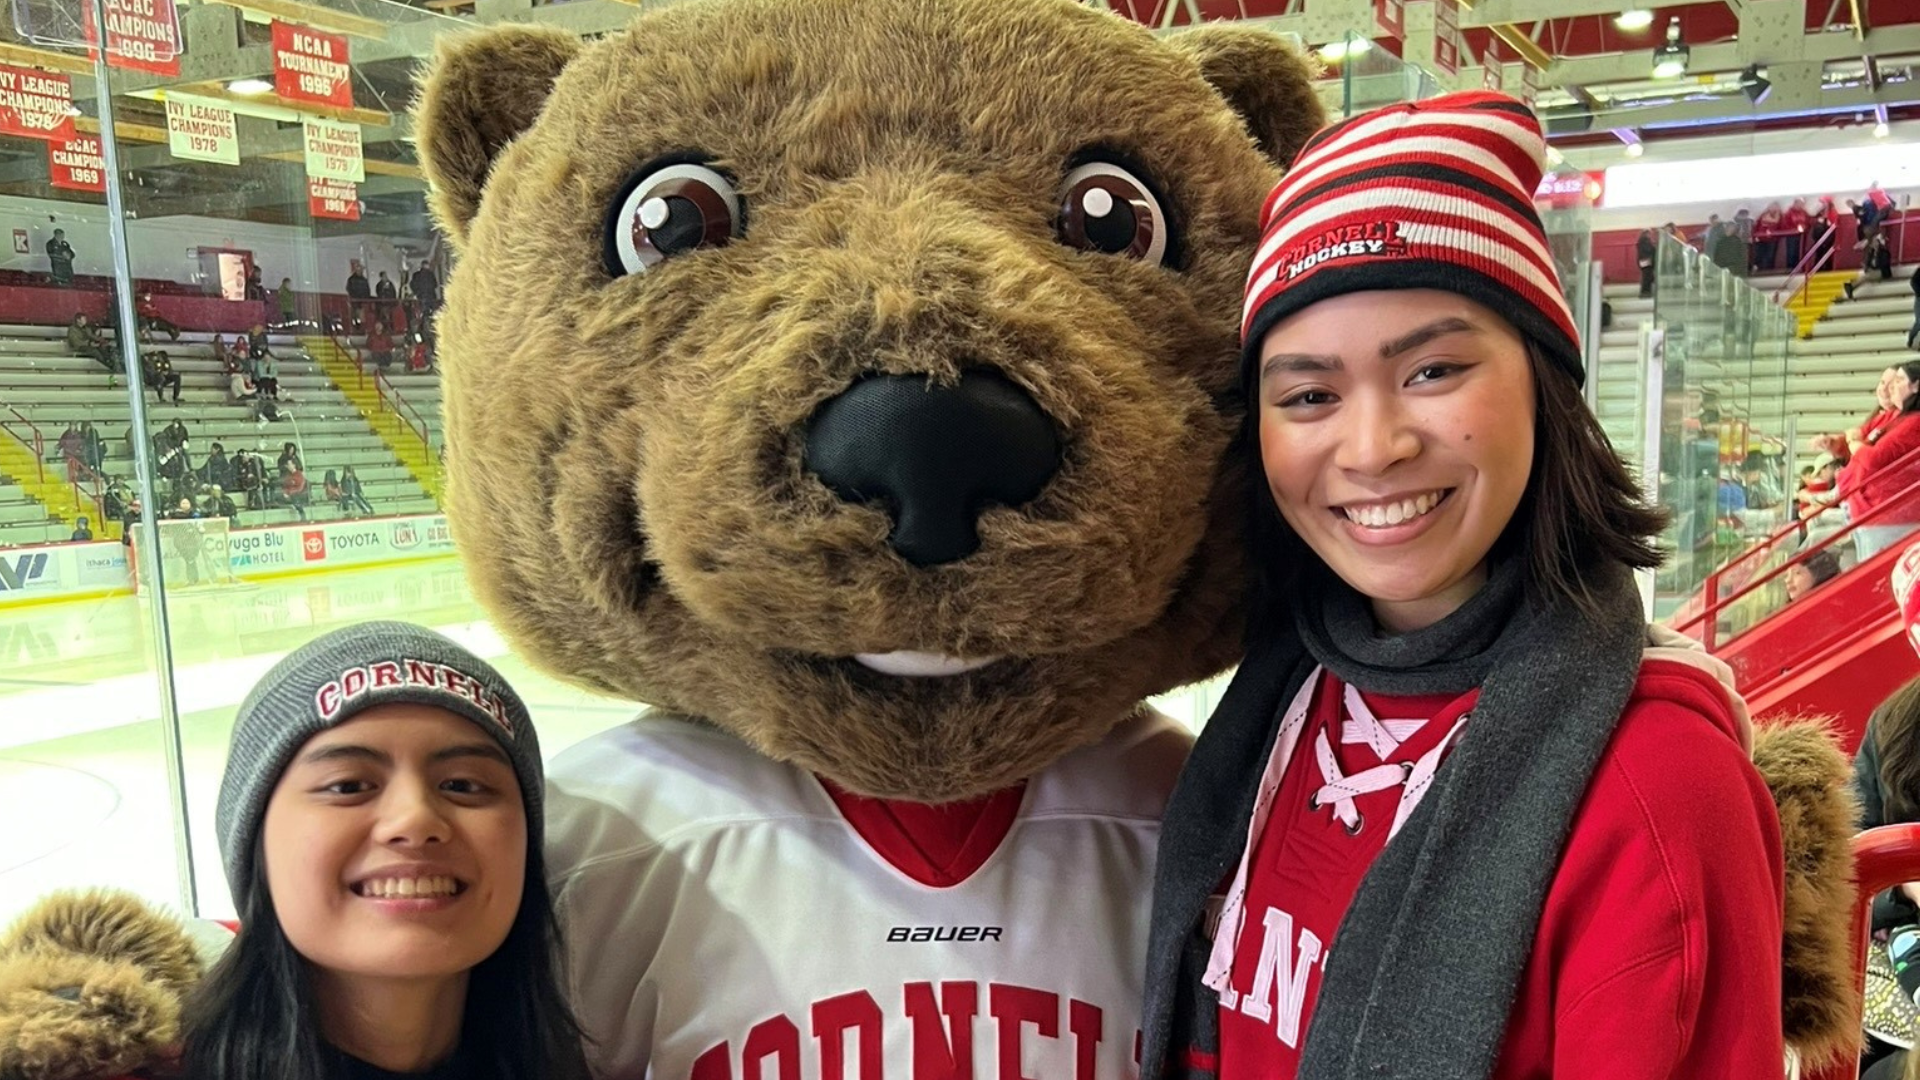 Friends pose with Touchdown at a Cornell hockey game